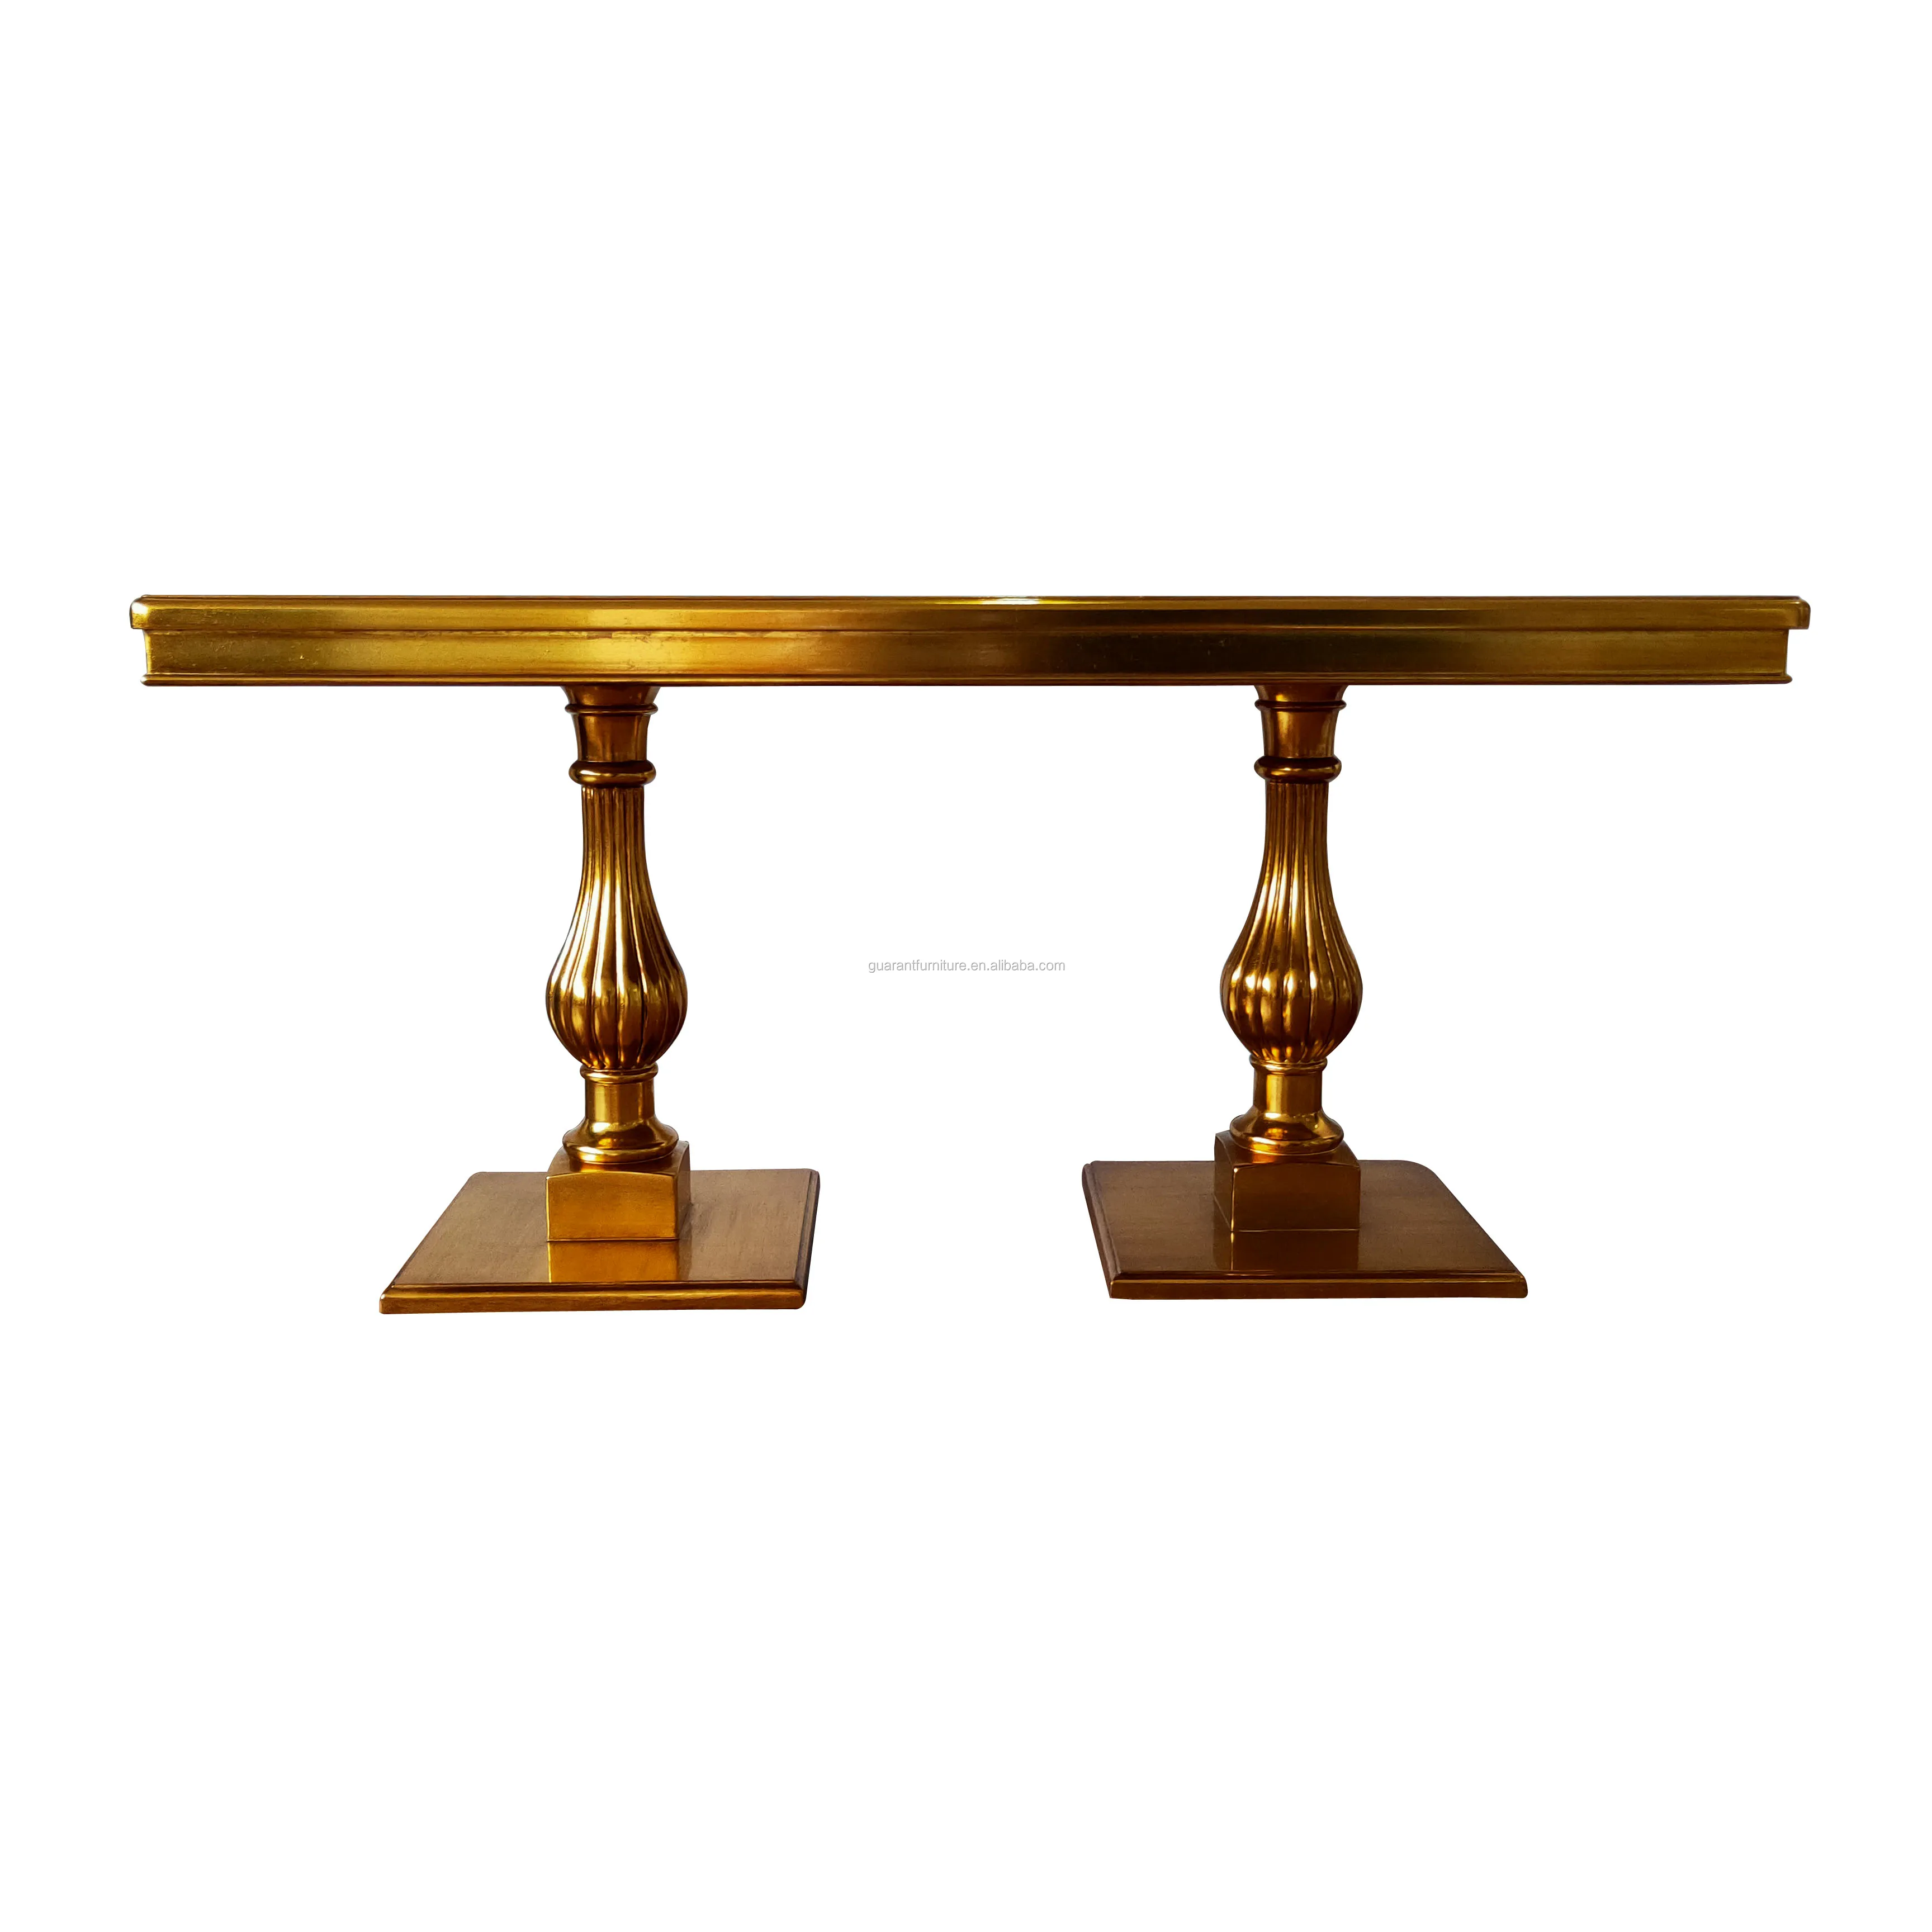 
full golden antique table antique dining table 4 chairs 